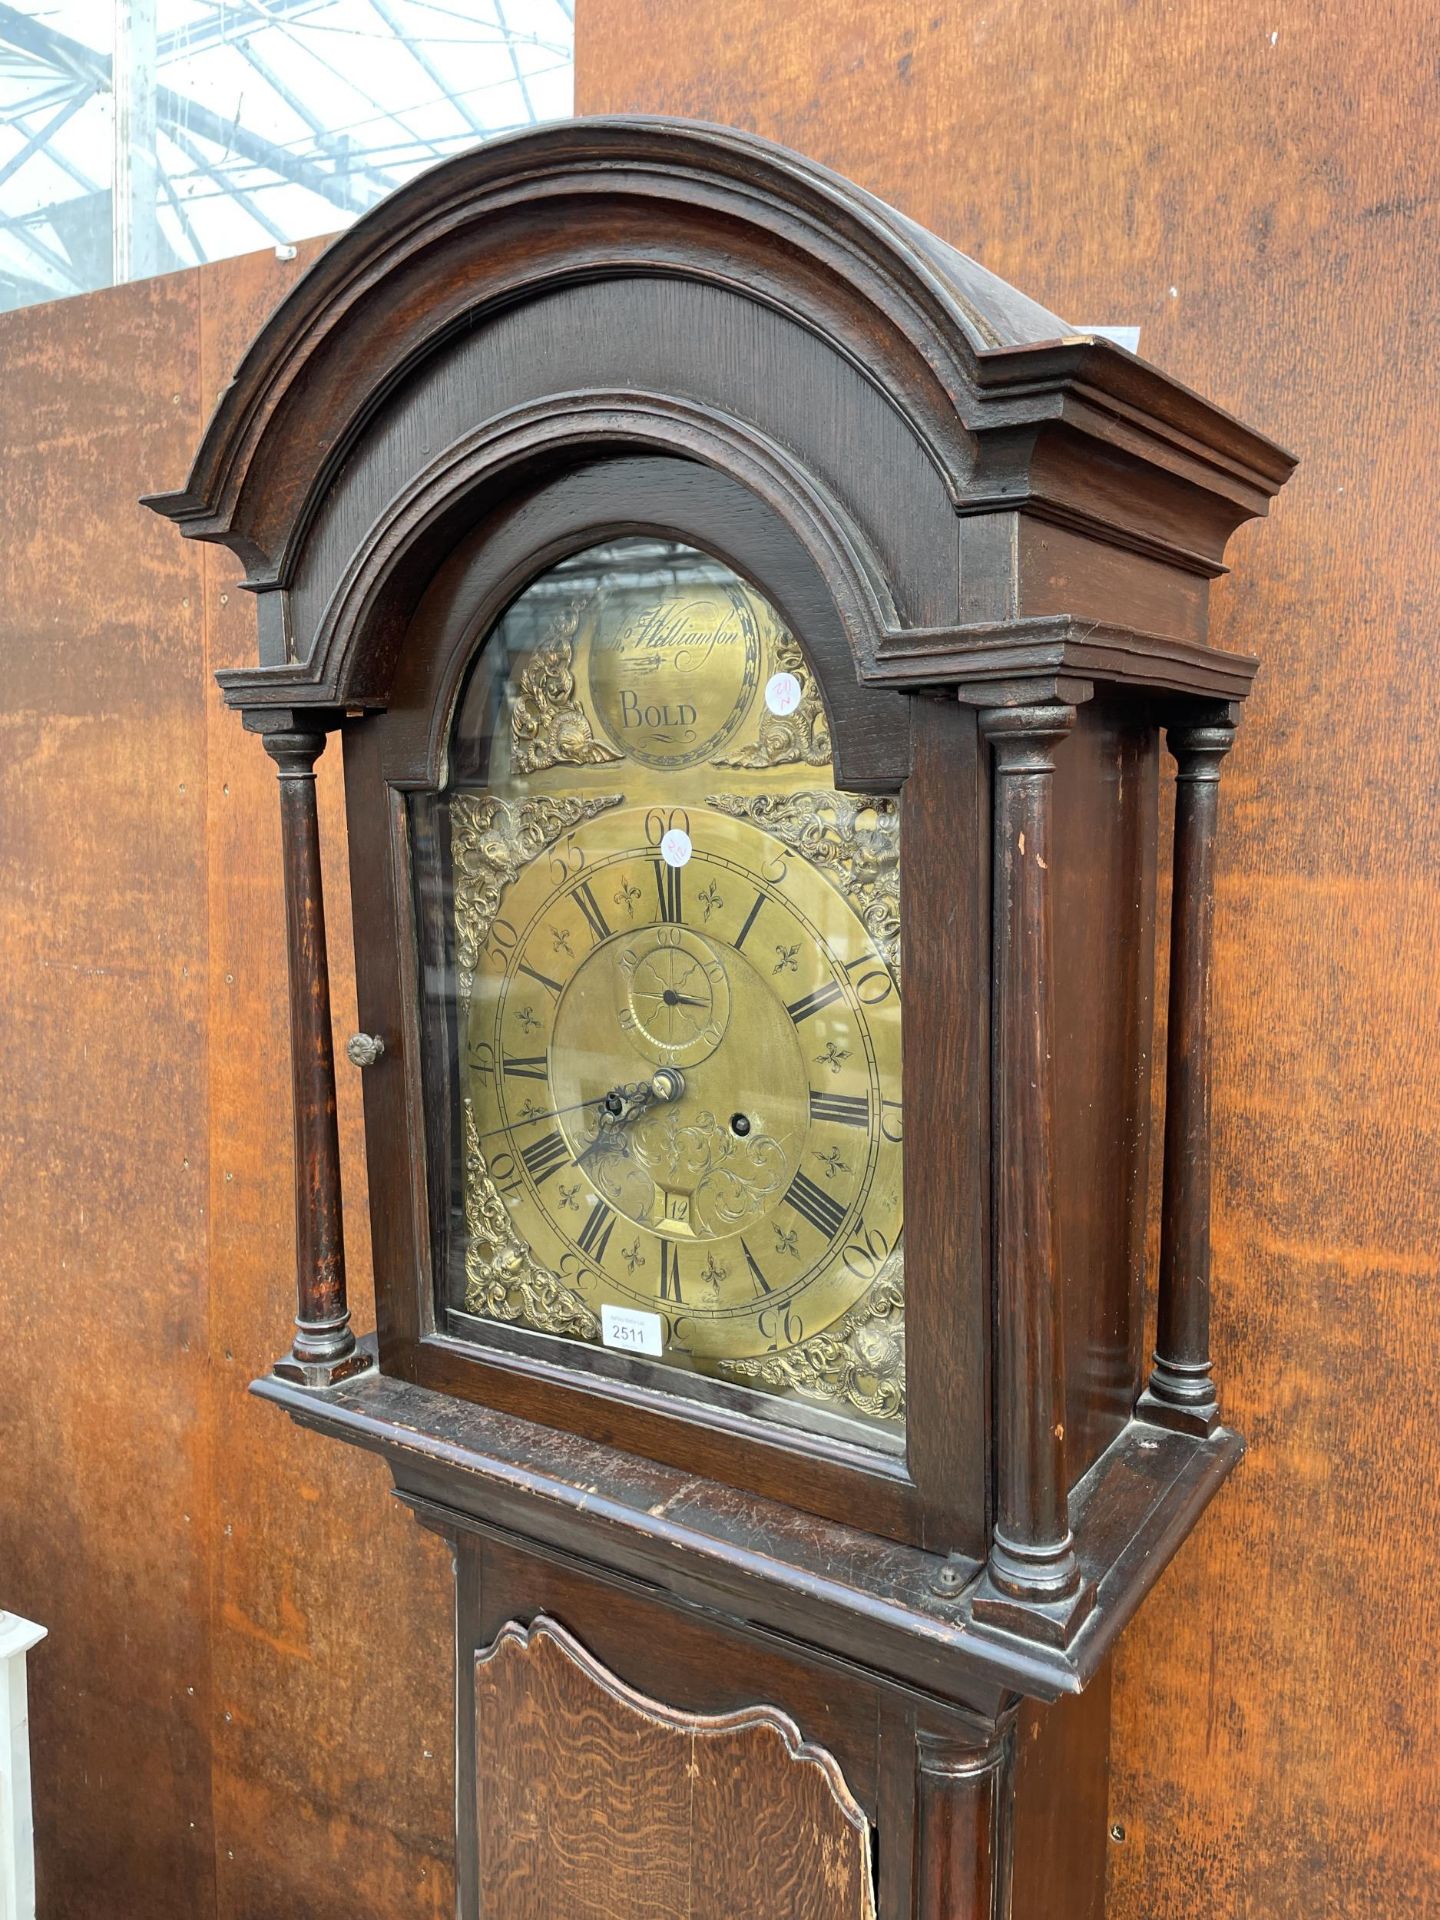 A LATE 18TH CENTURY OAK 8 DAY JND. WILLIAMSON (BOLD) LONGCASE CLOCK WITH BRASS DIAL, ROMAN NUMERIALS - Image 2 of 9